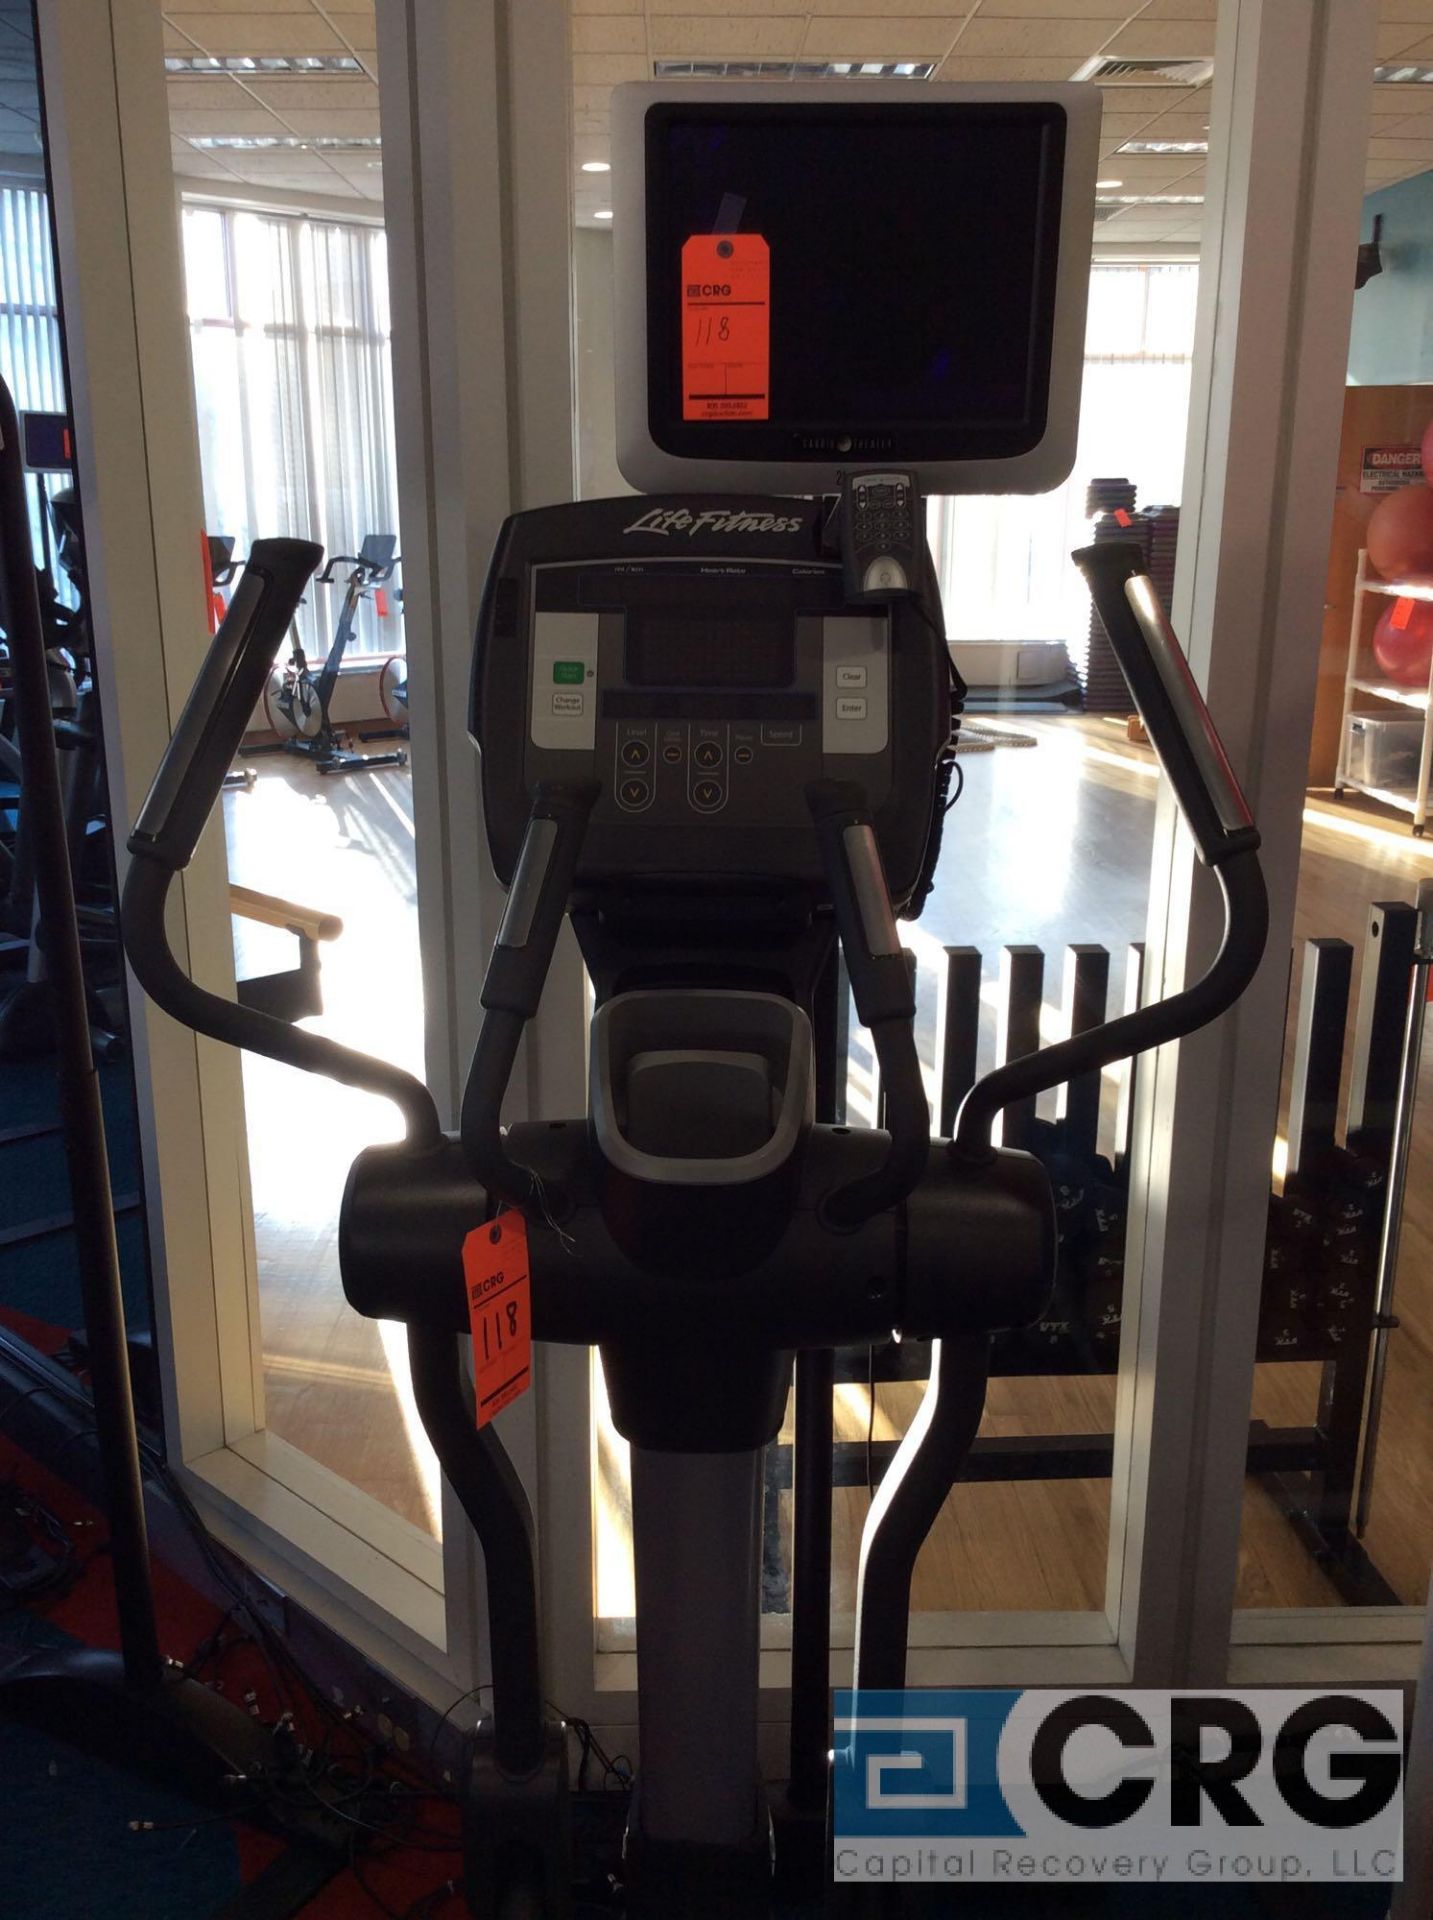 Life-Fitness 95X Elliptical Machine with Cardio Theater Monitor, s/n XTM125170 - Image 3 of 3